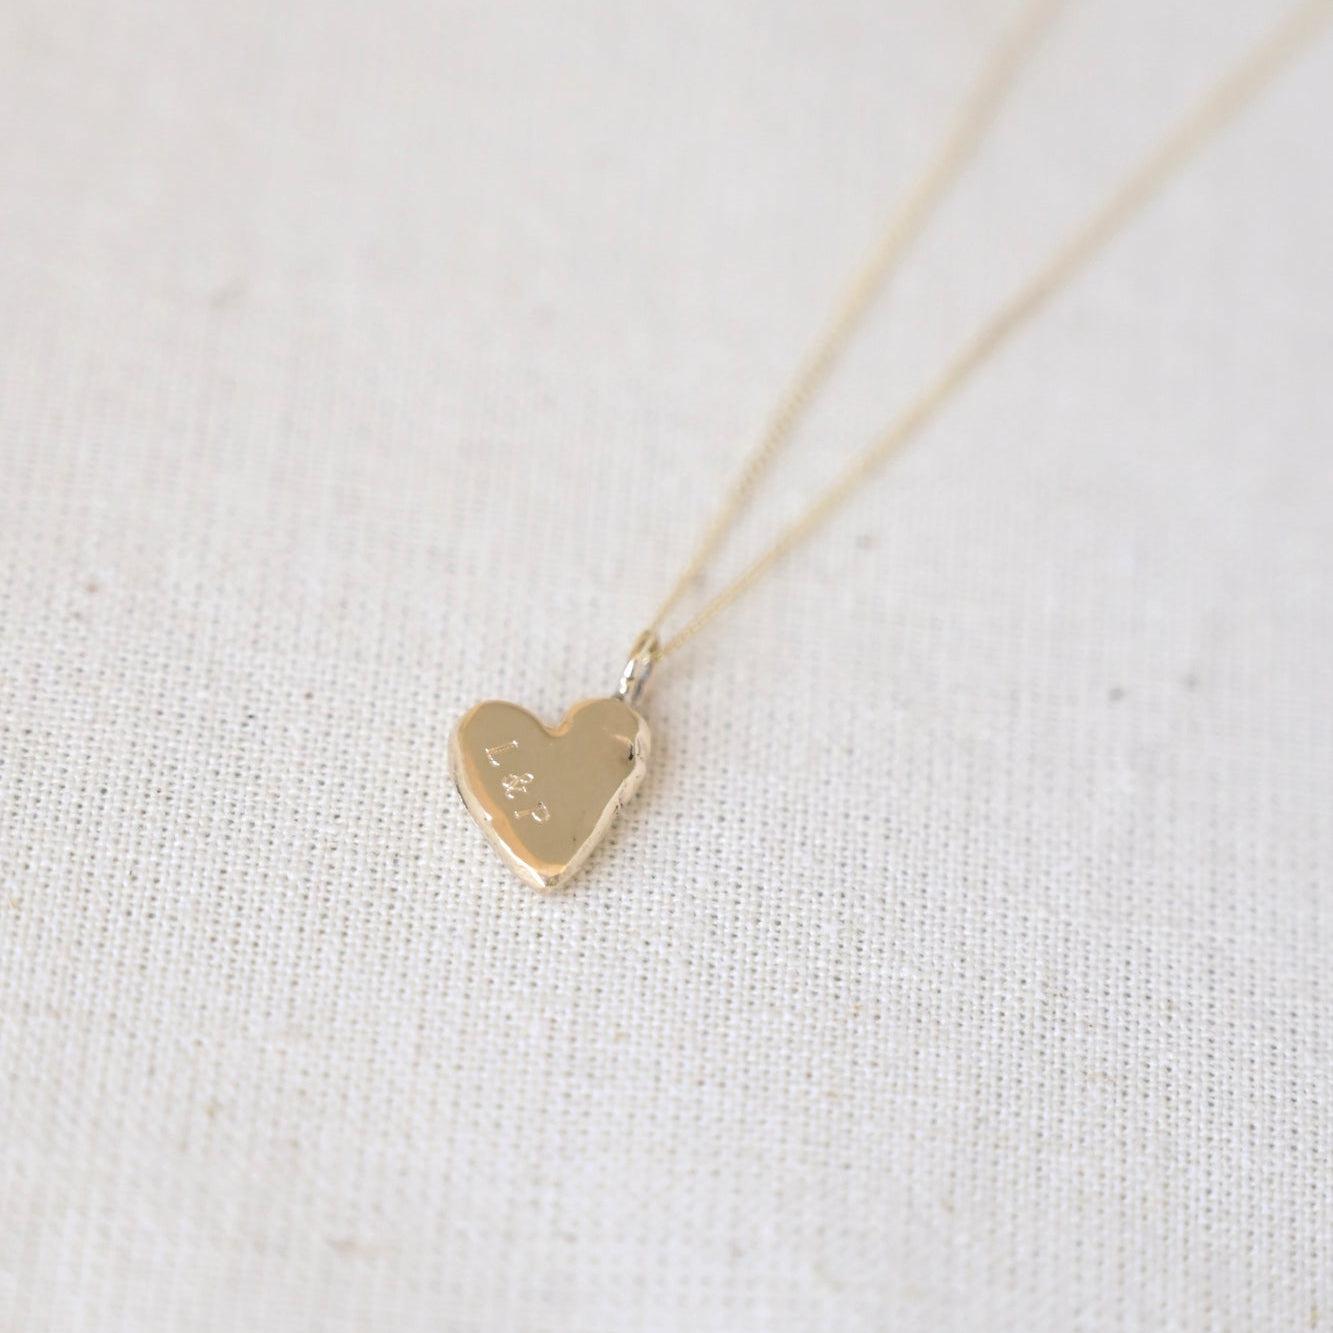 9ct-Gold-Personalised-Handformed-Heart-Pendant-Necklace-2.jpg